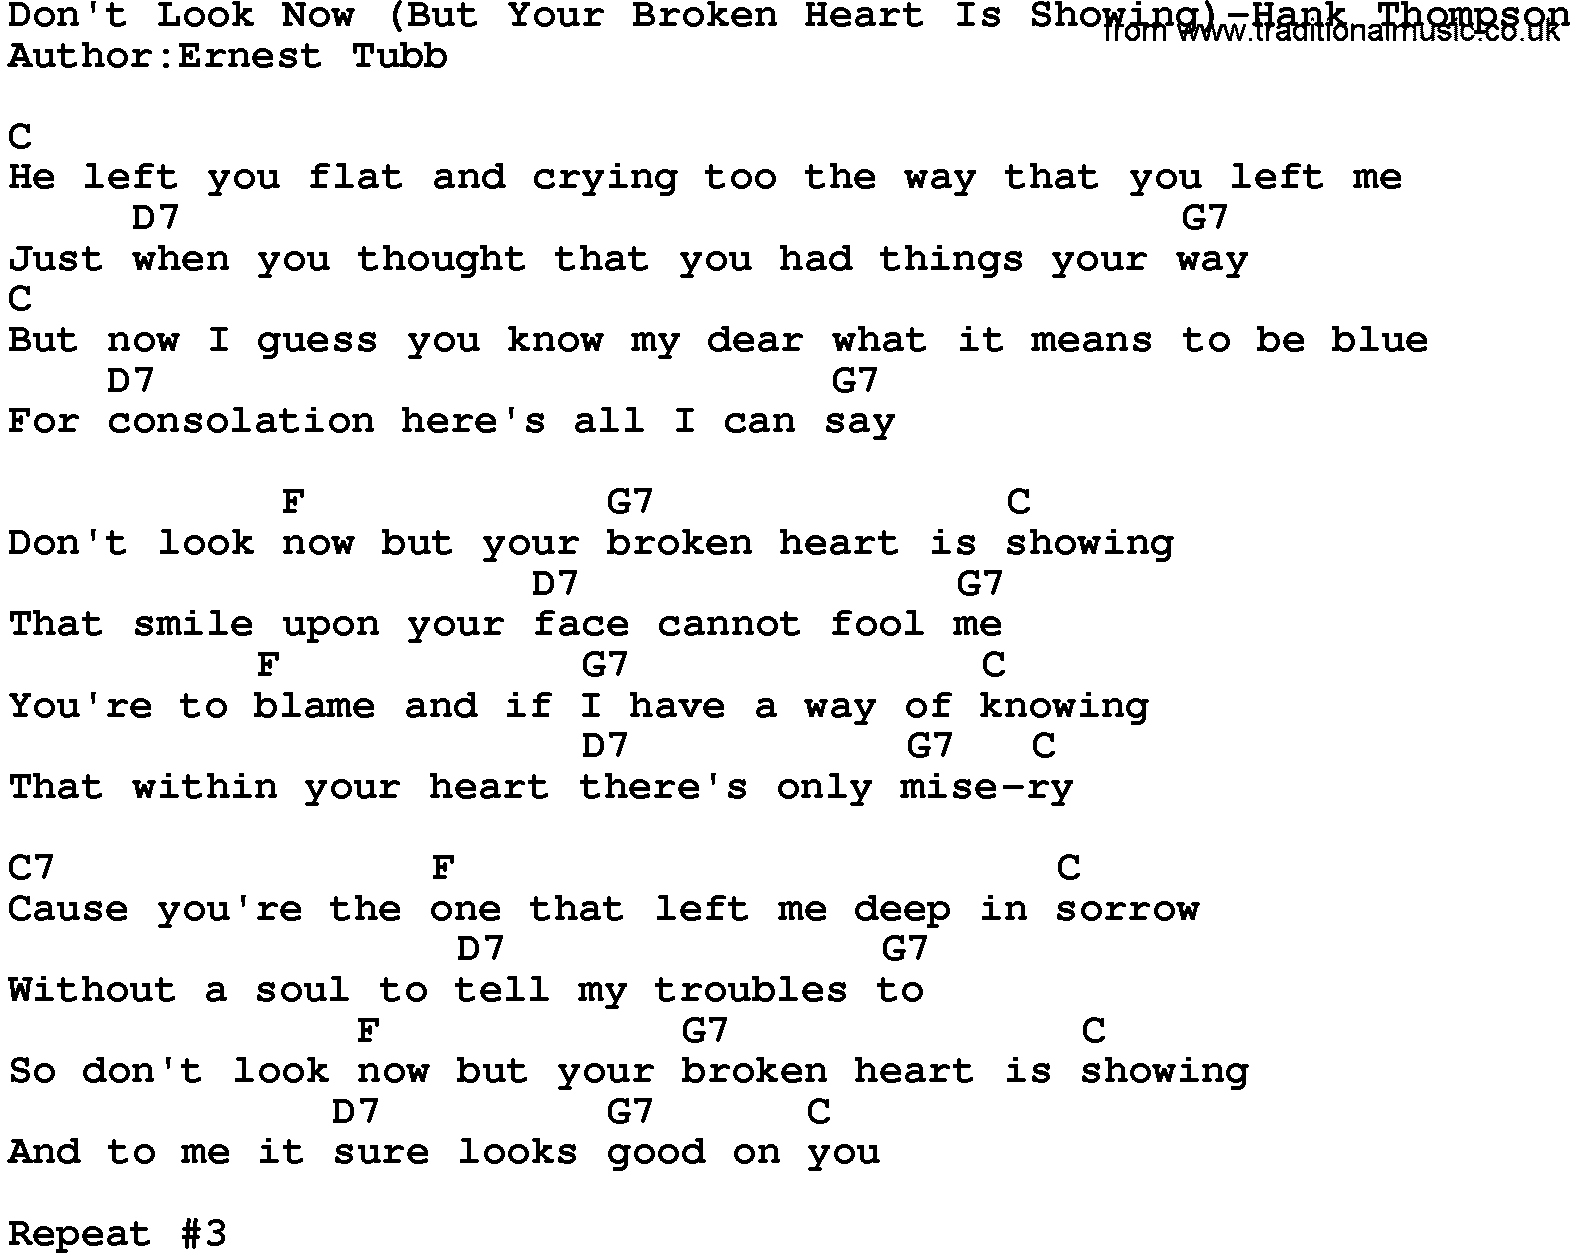 Country music song: Don't Look Now(But Your Broken Heart Is Showing)-Hank Thompson lyrics and chords